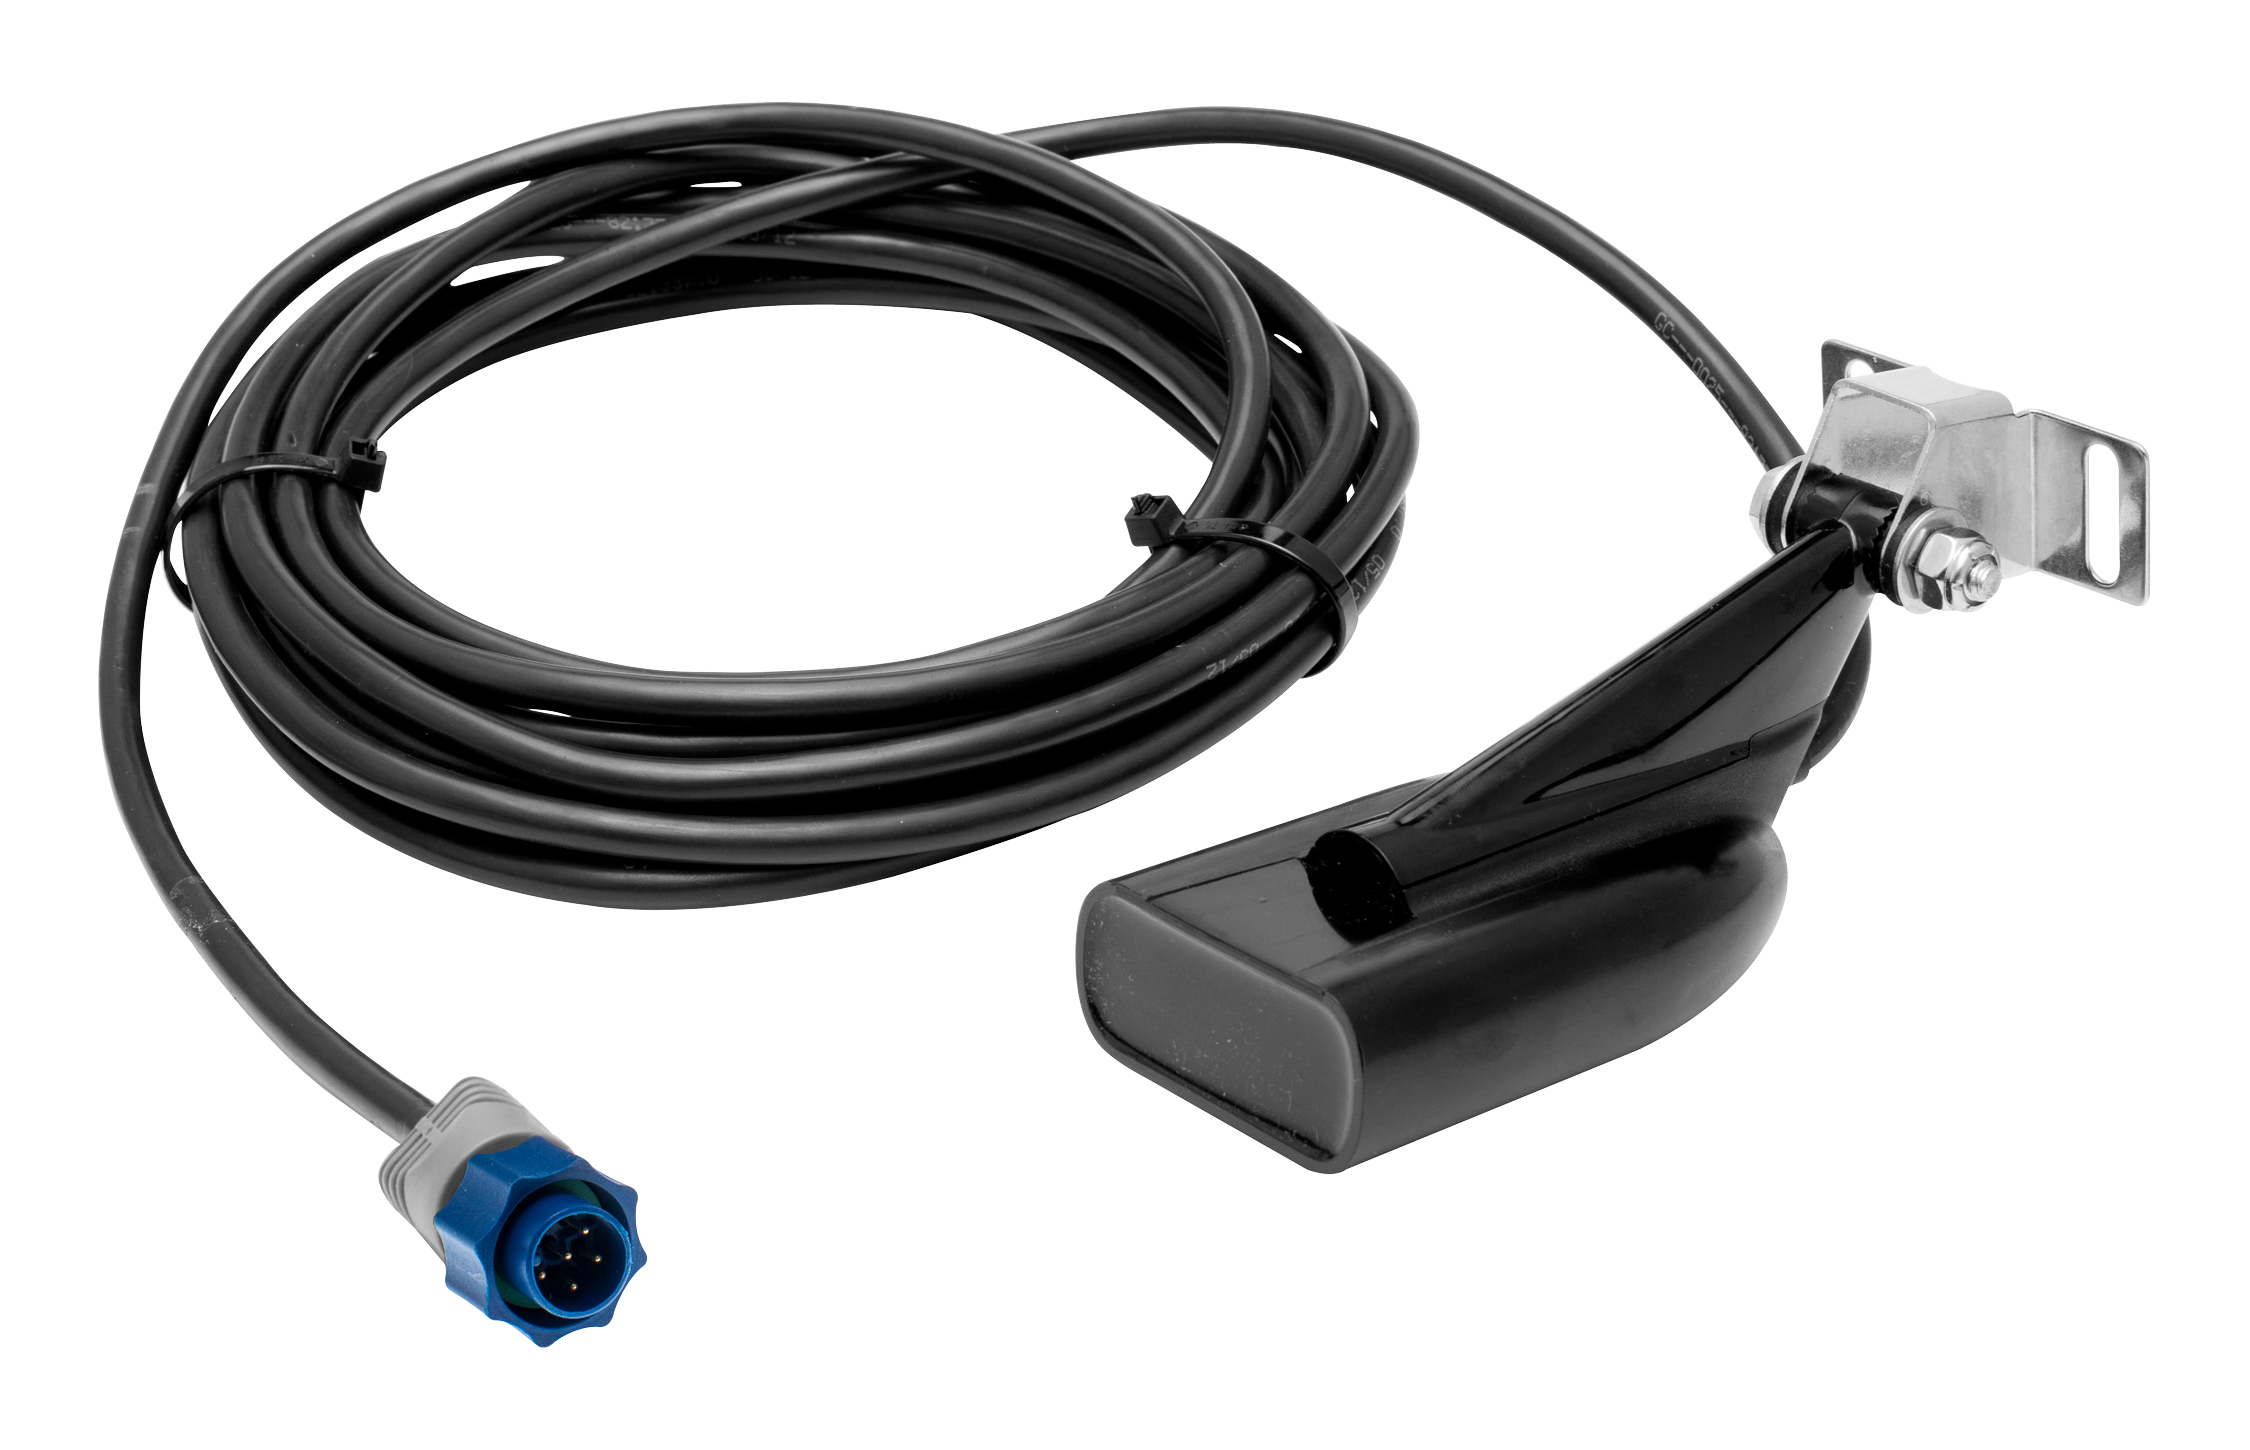  Lowrance 000-13313-001 7 Pin Blue To 9 Pin Adapter,Black :  Electronics